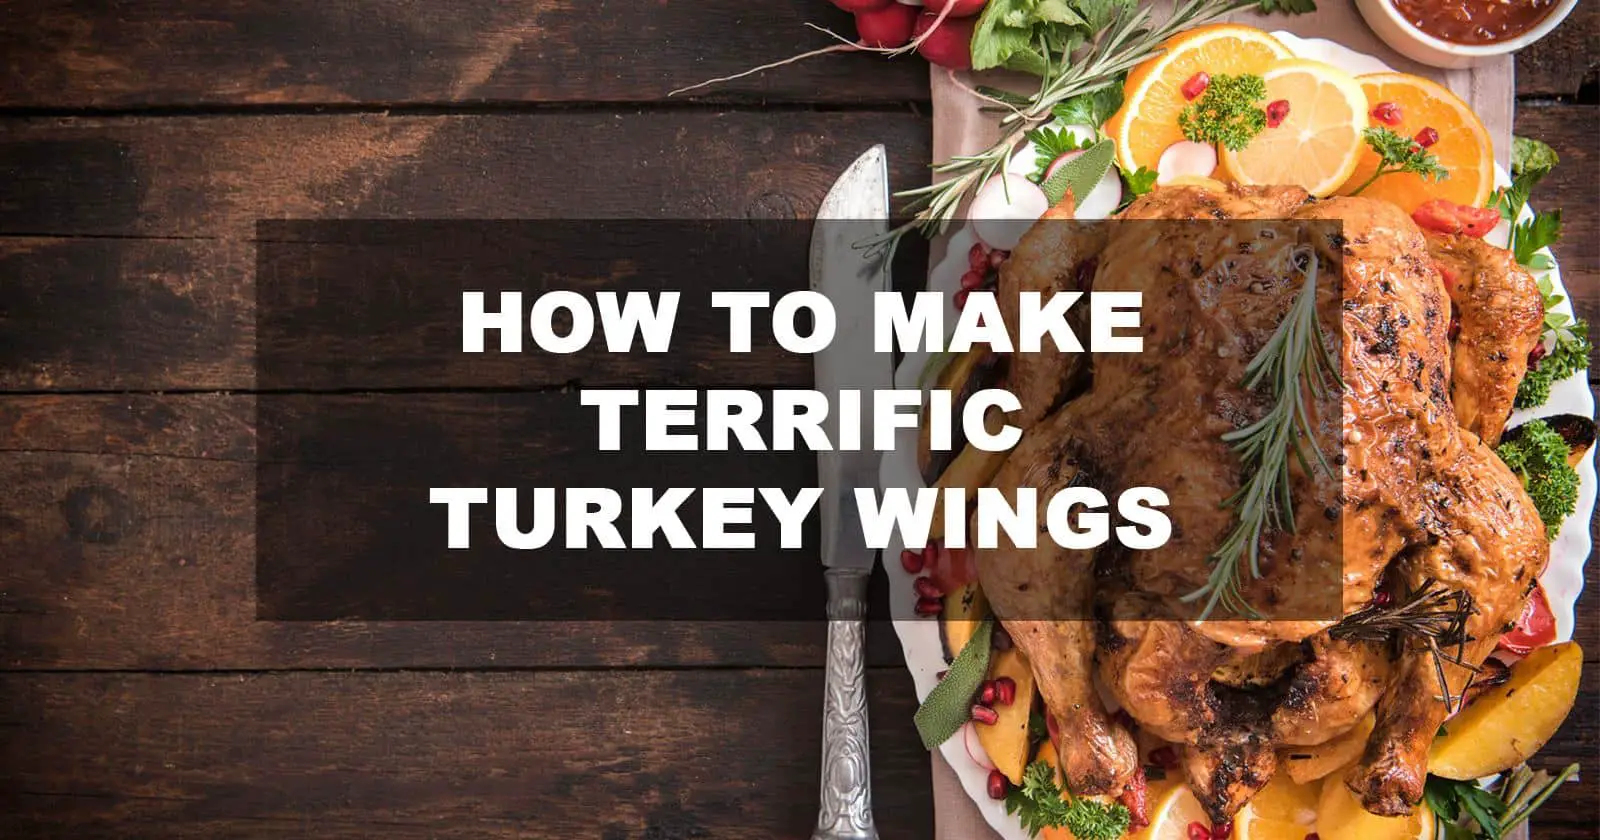 How to cook turkey wings